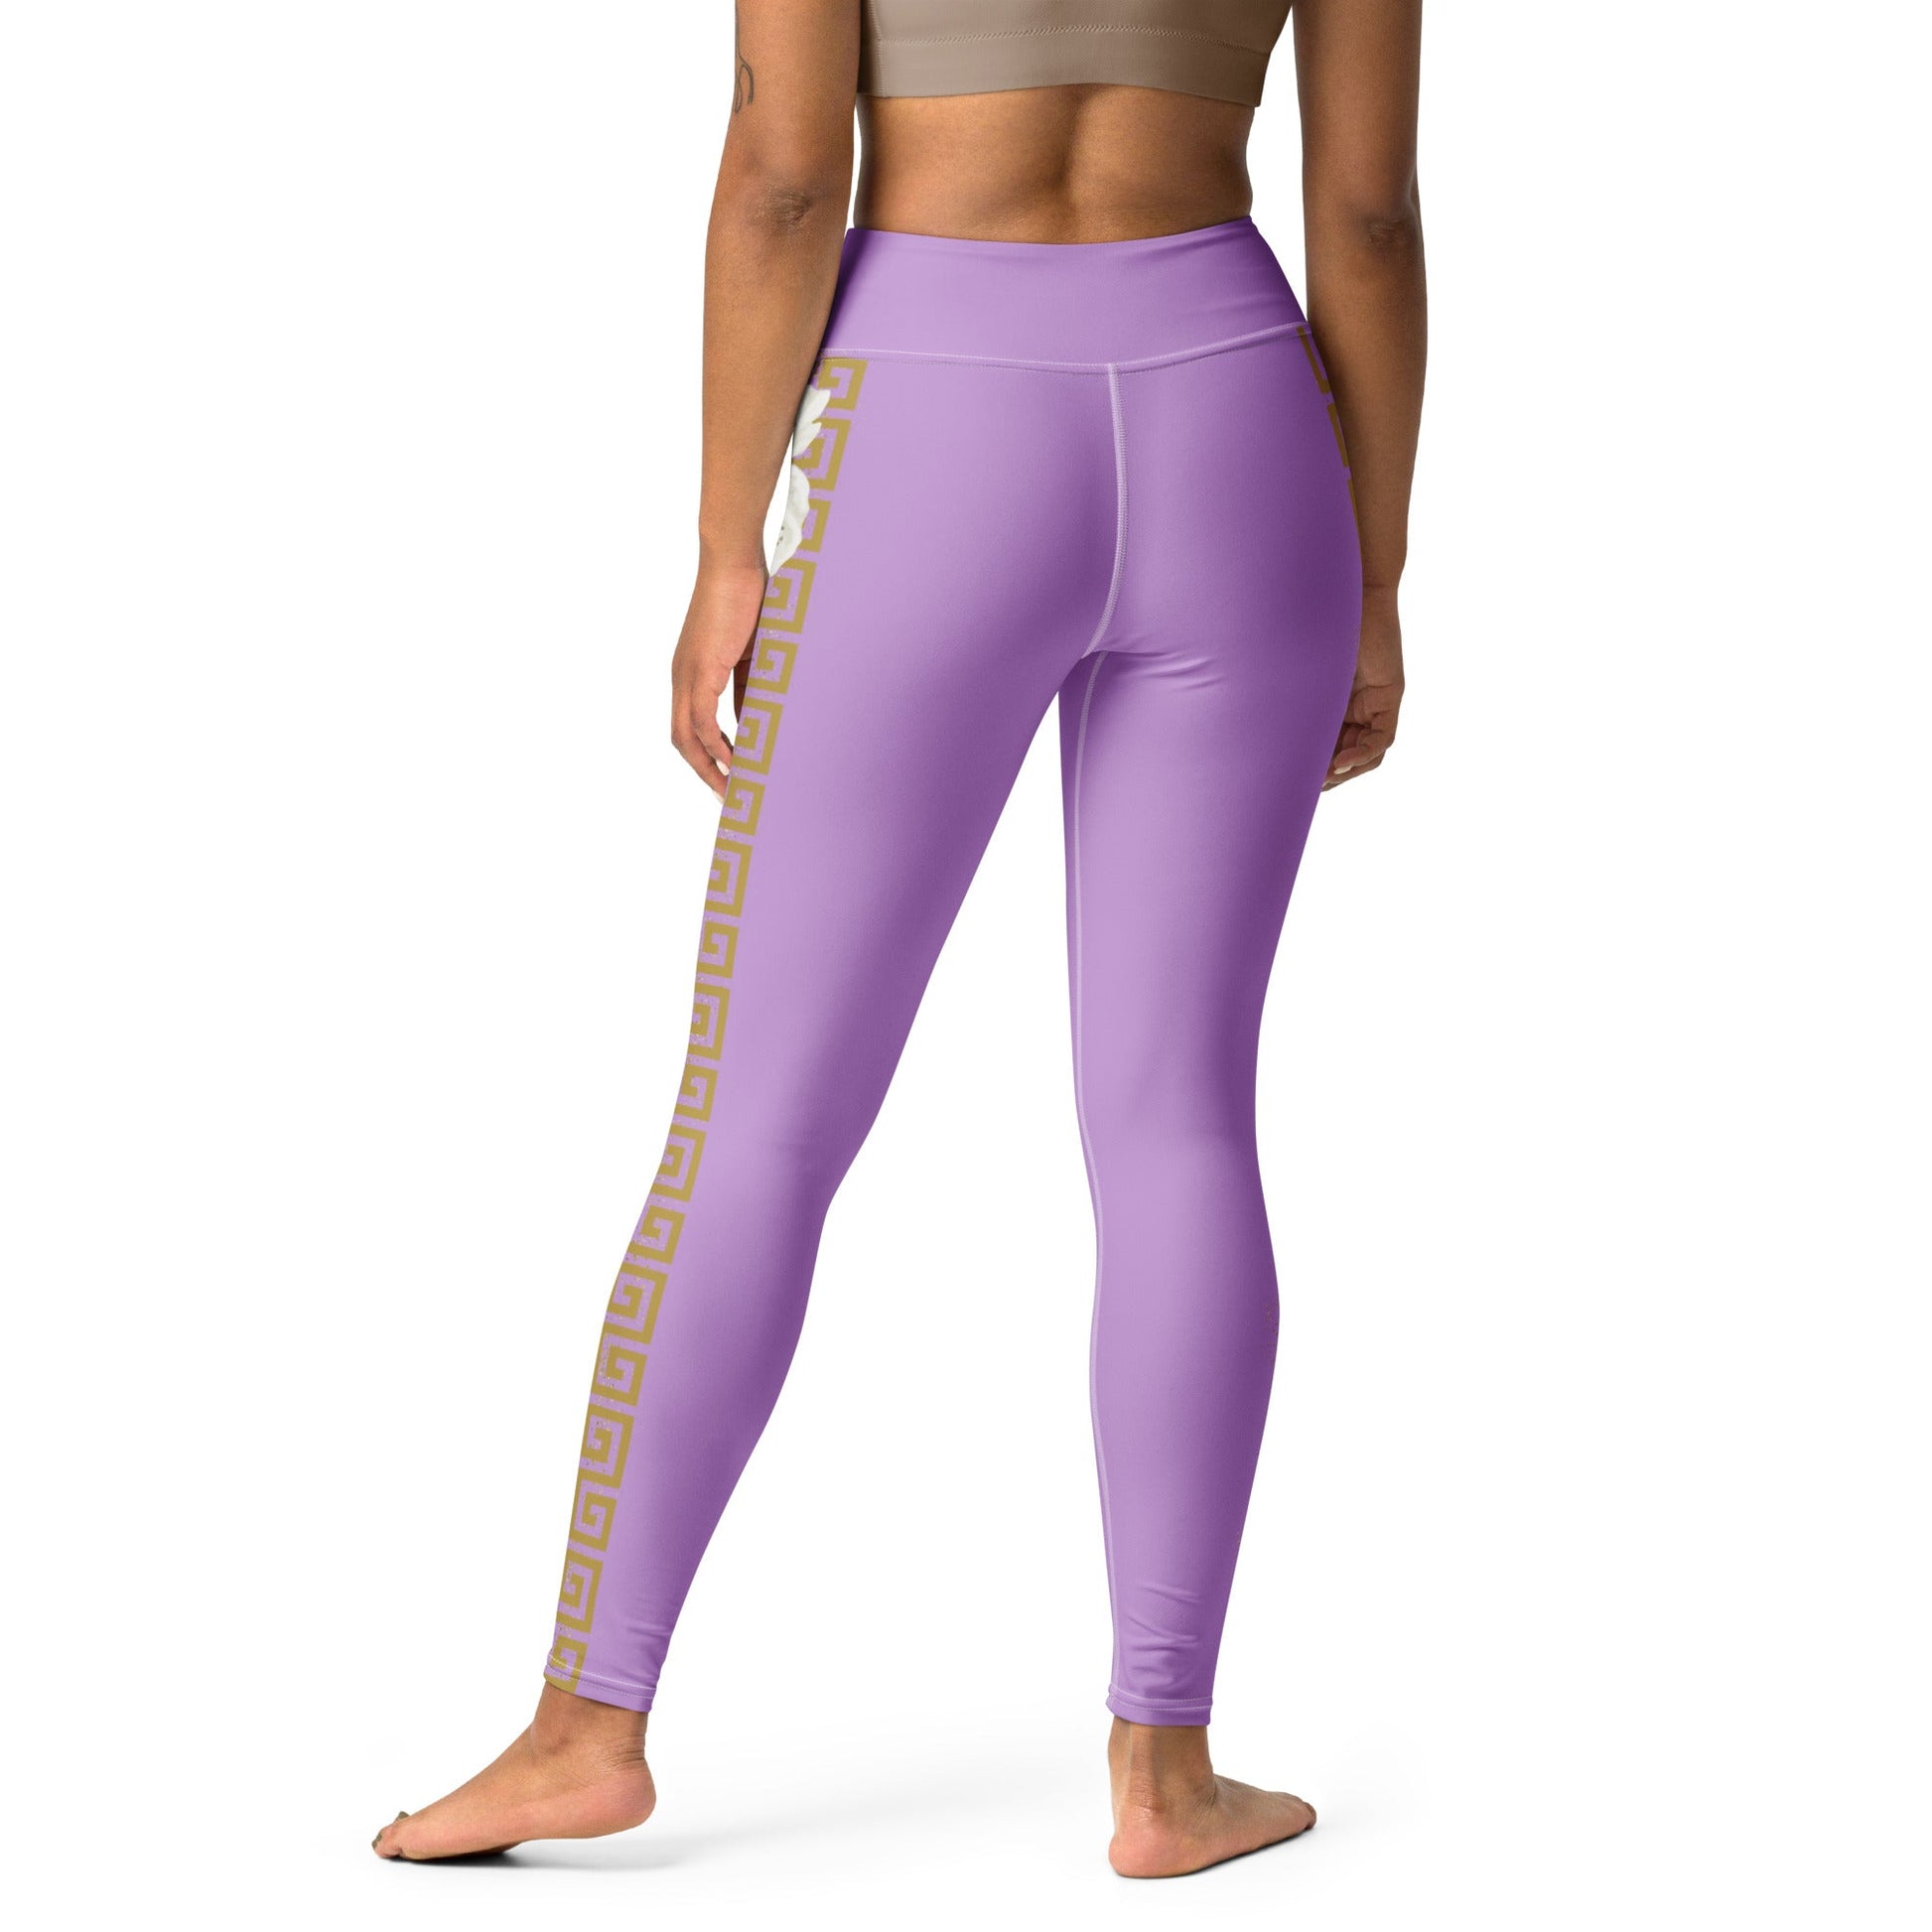 The Megara Yoga Leggings active wearboo to youAdult LeggingsLittle Lady Shay Boutique